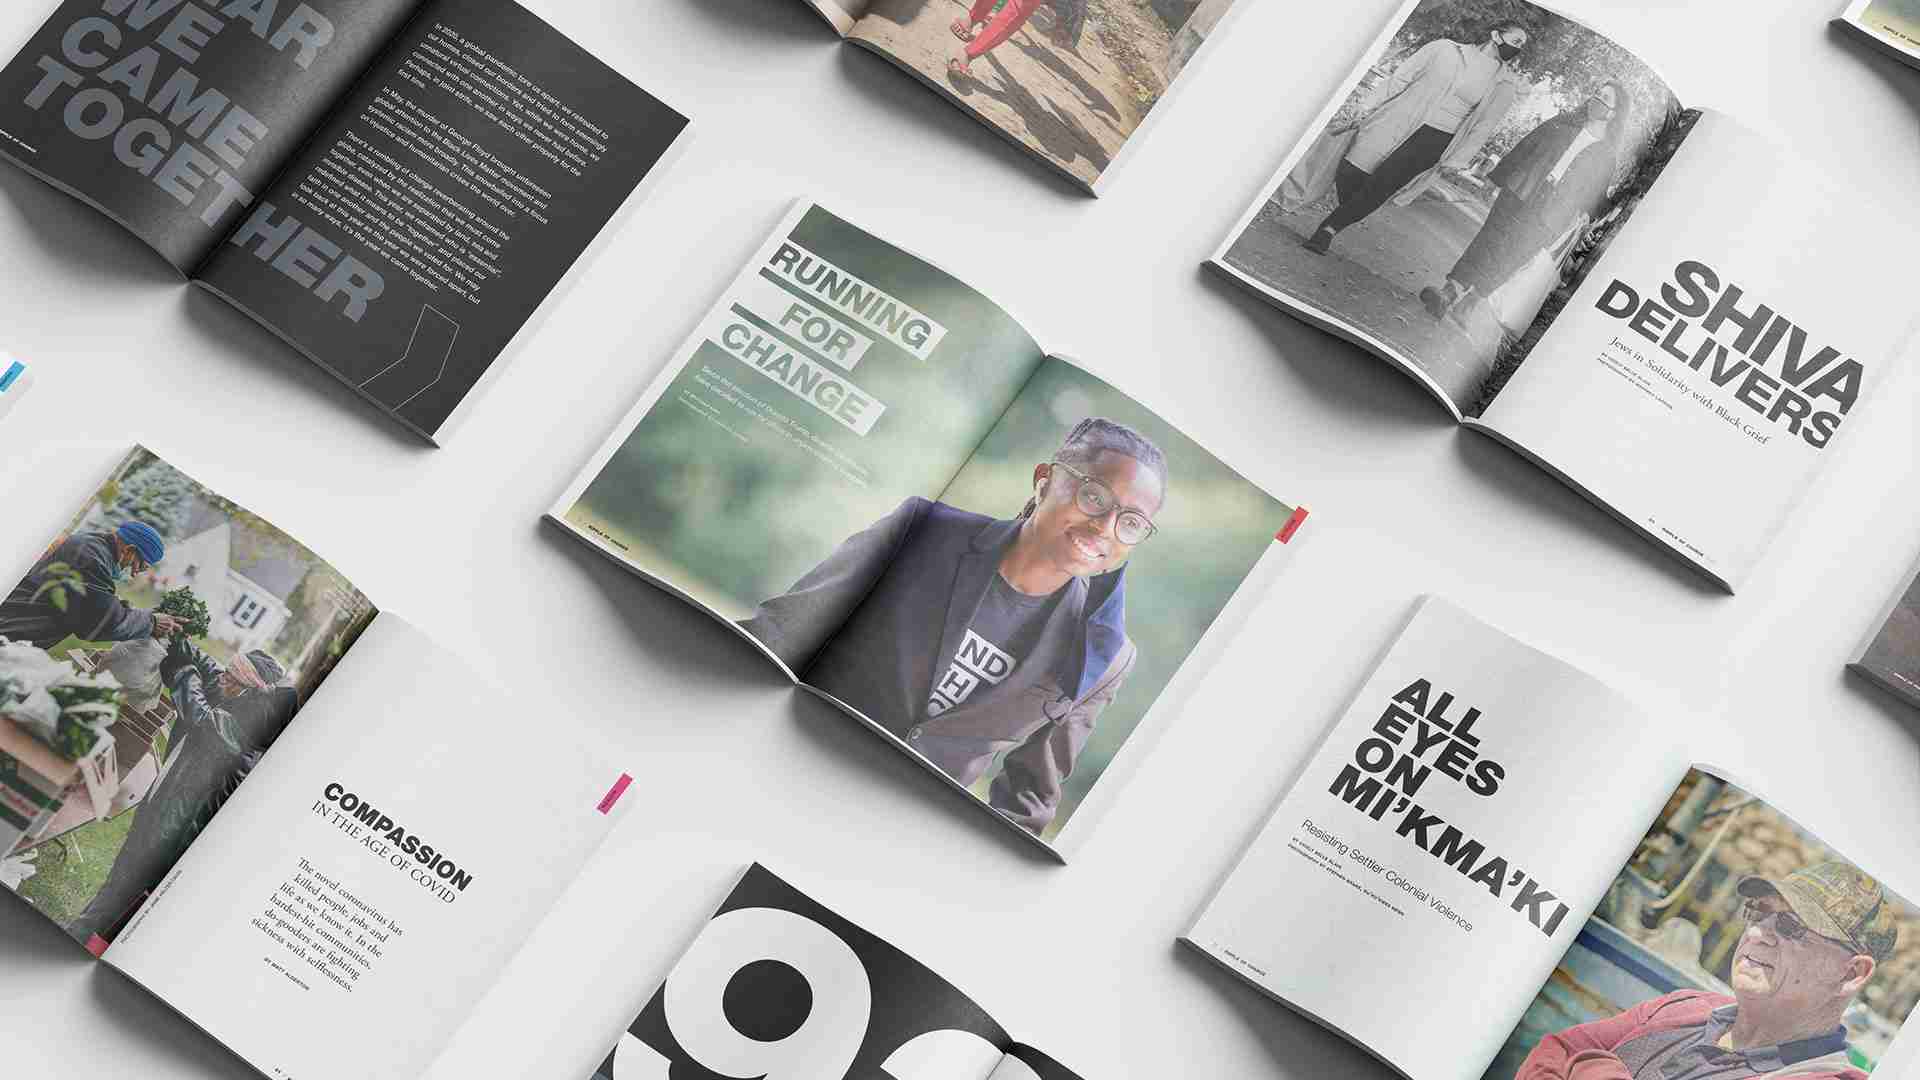 RIPPLE OF CHANGE Issue 01 – a spread of open pages from the magazine